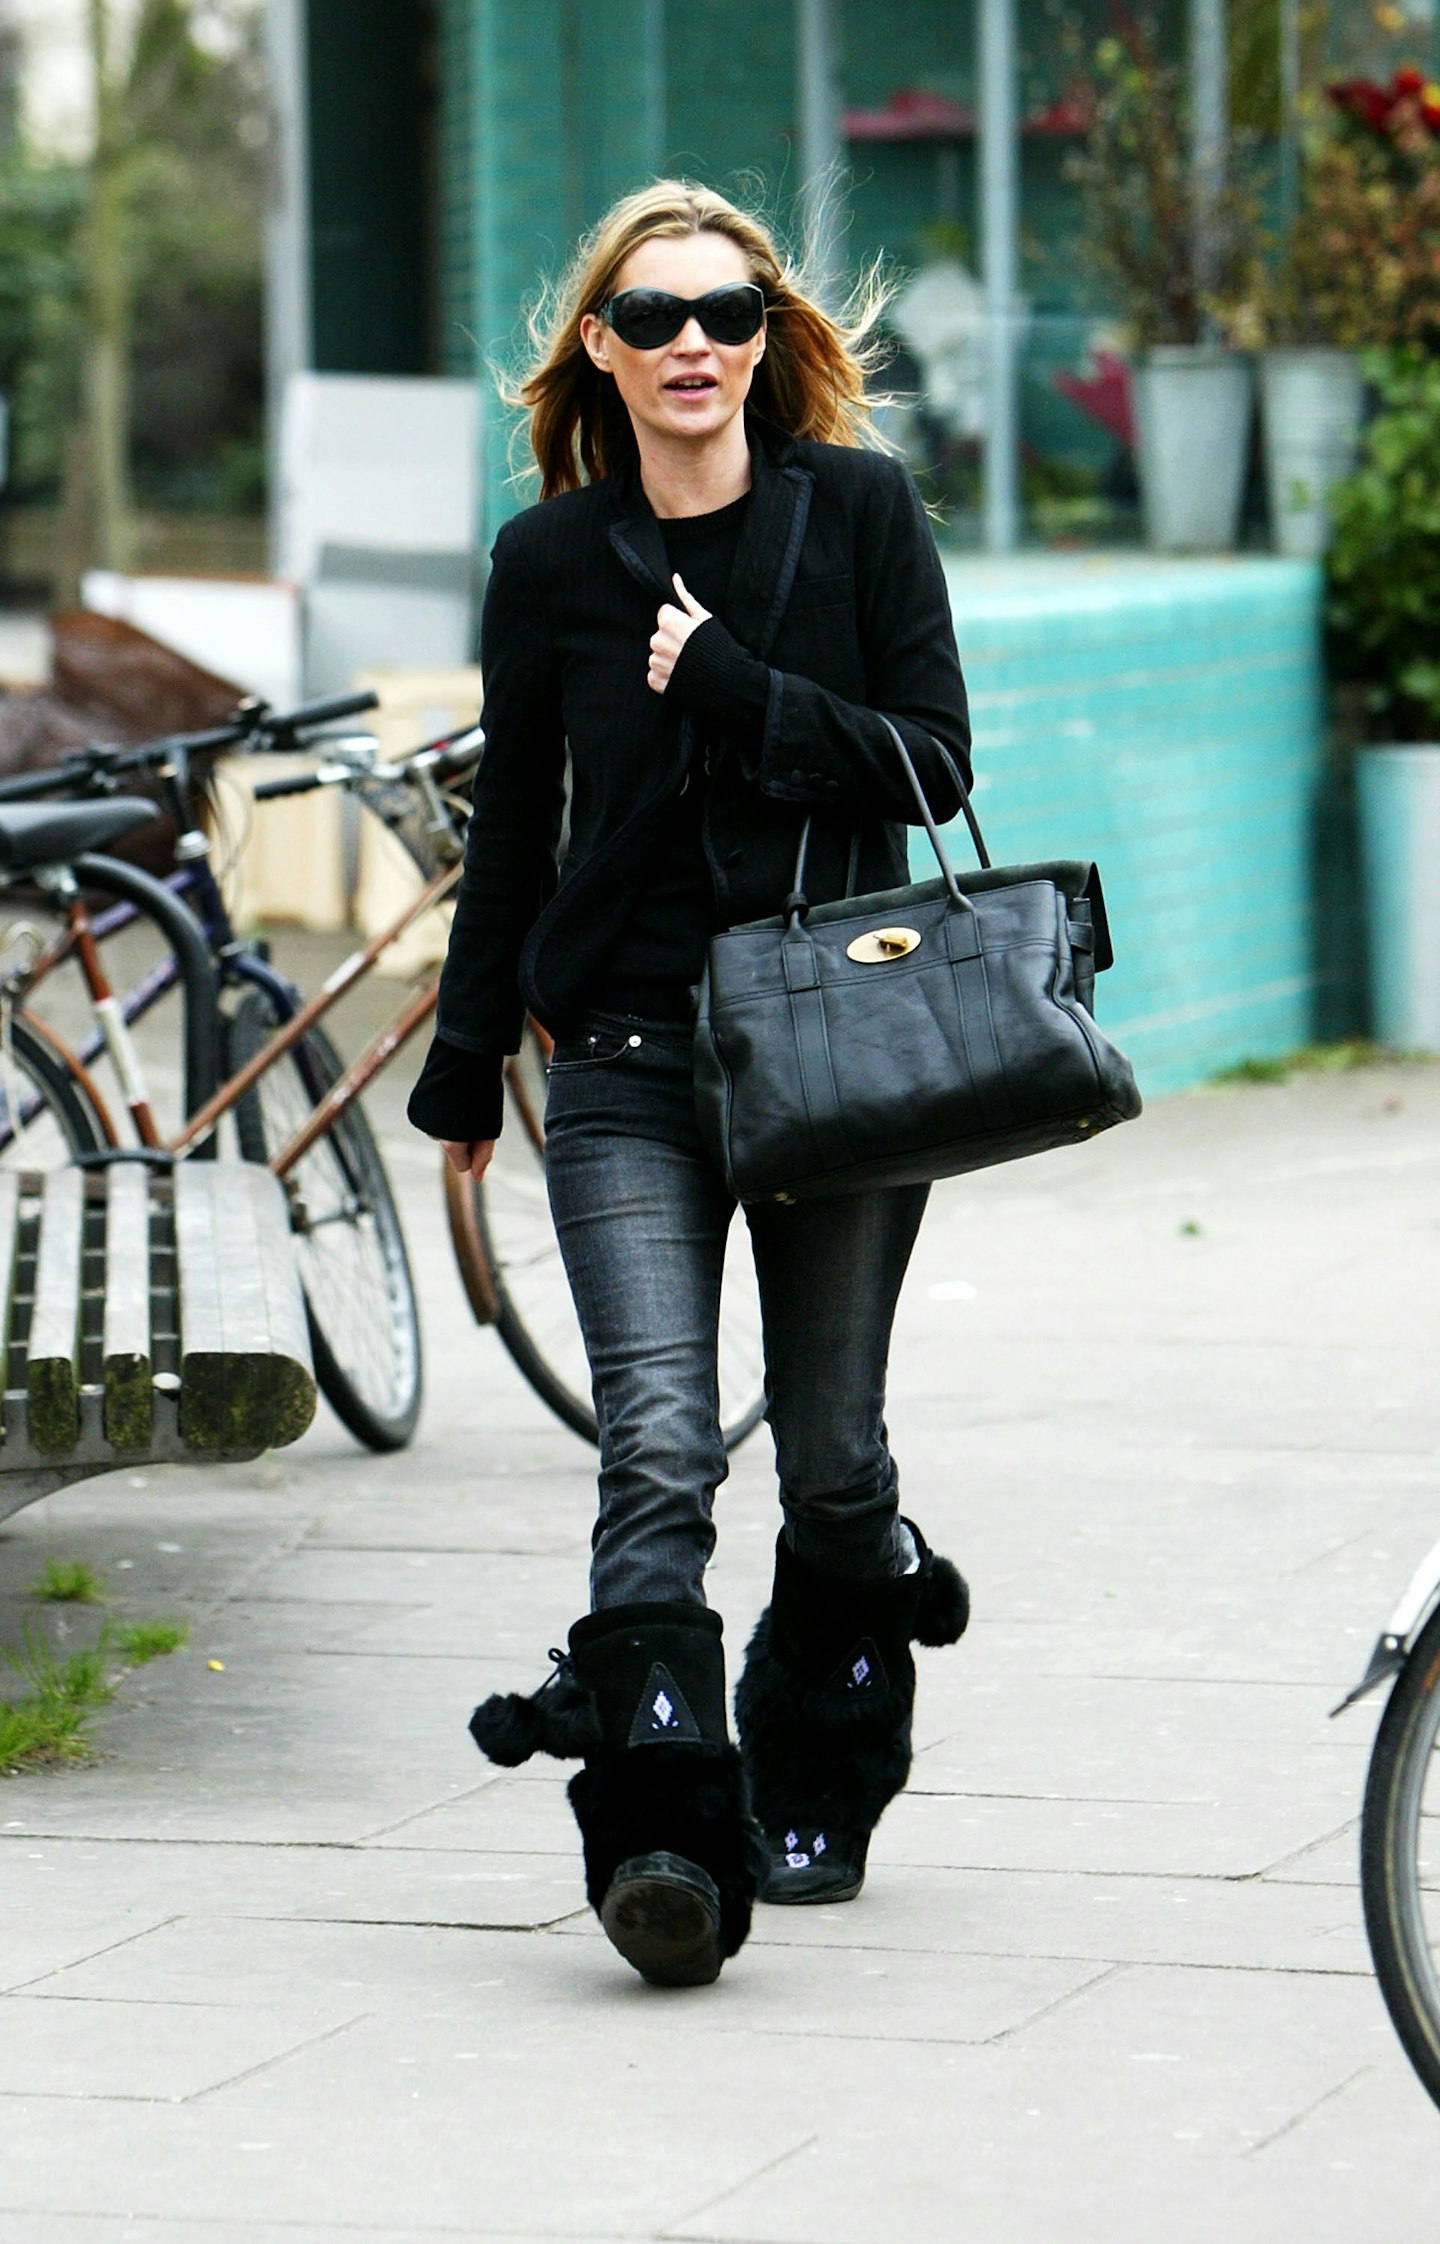 How Uggs became the celebrity fashion trend that will never die